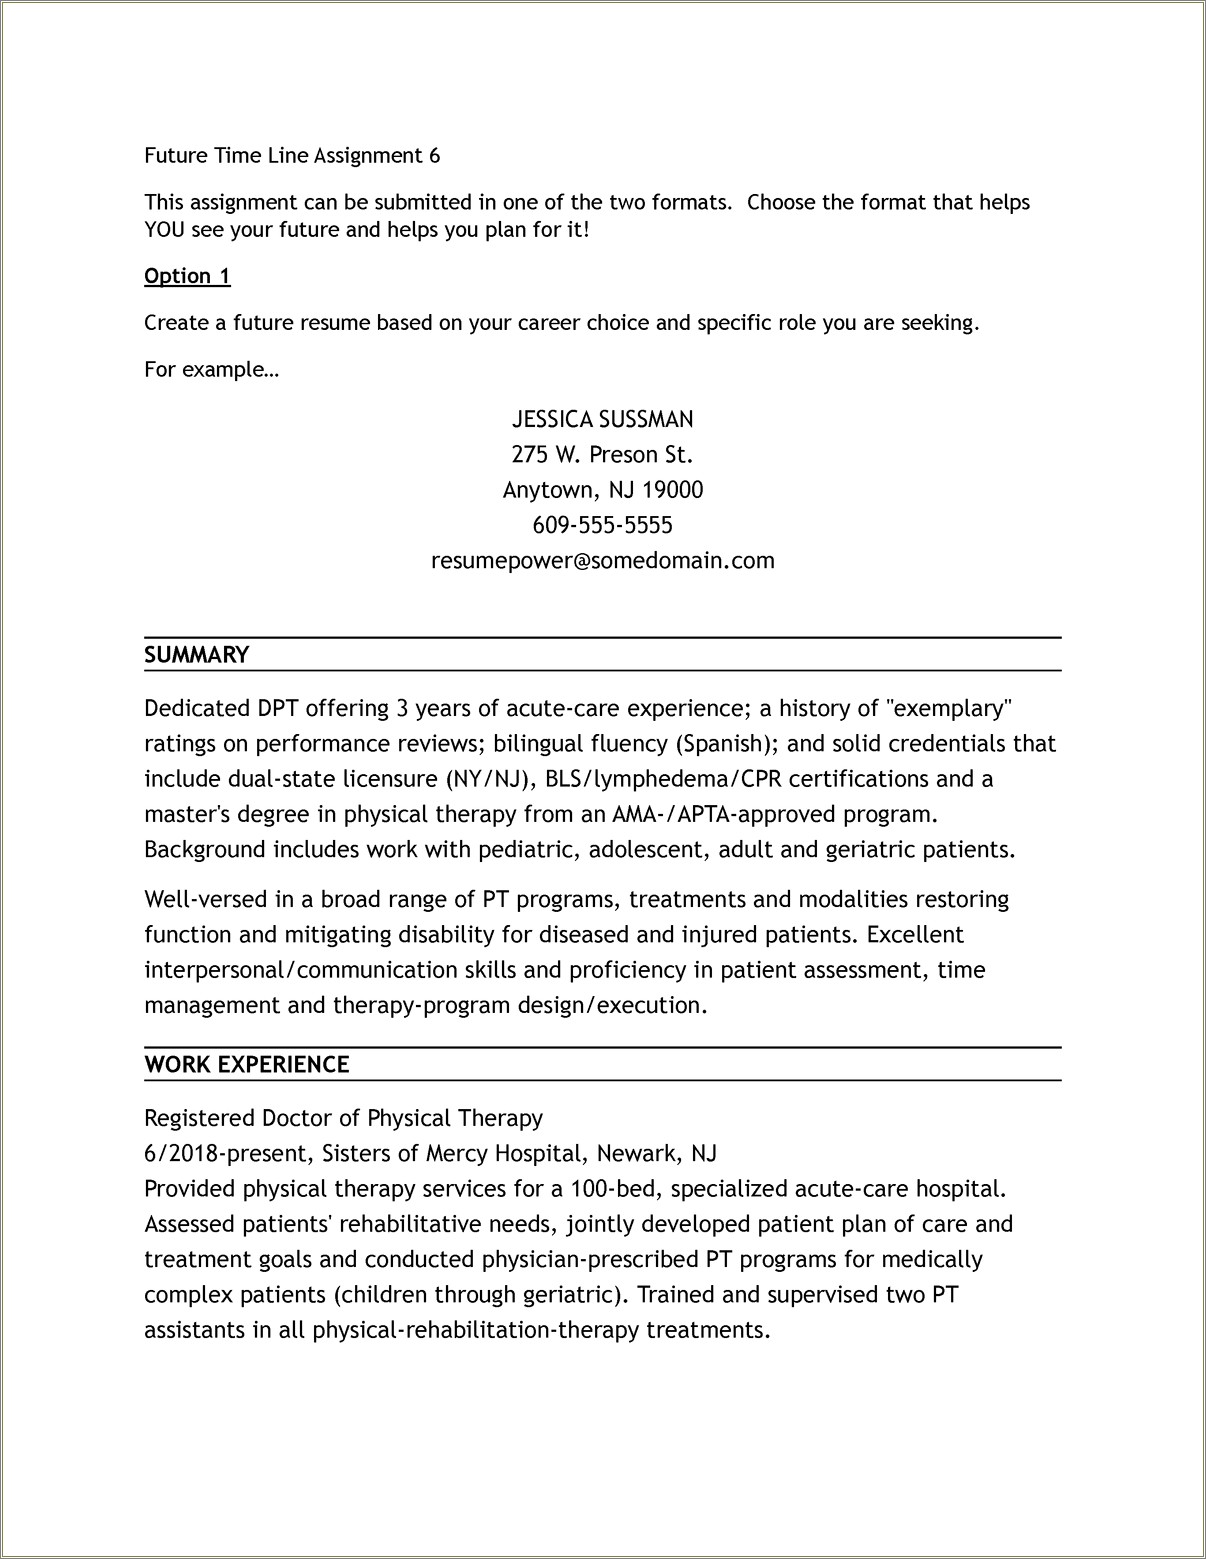 Resume Summary Broad Range Of Physical Therapy Interventions